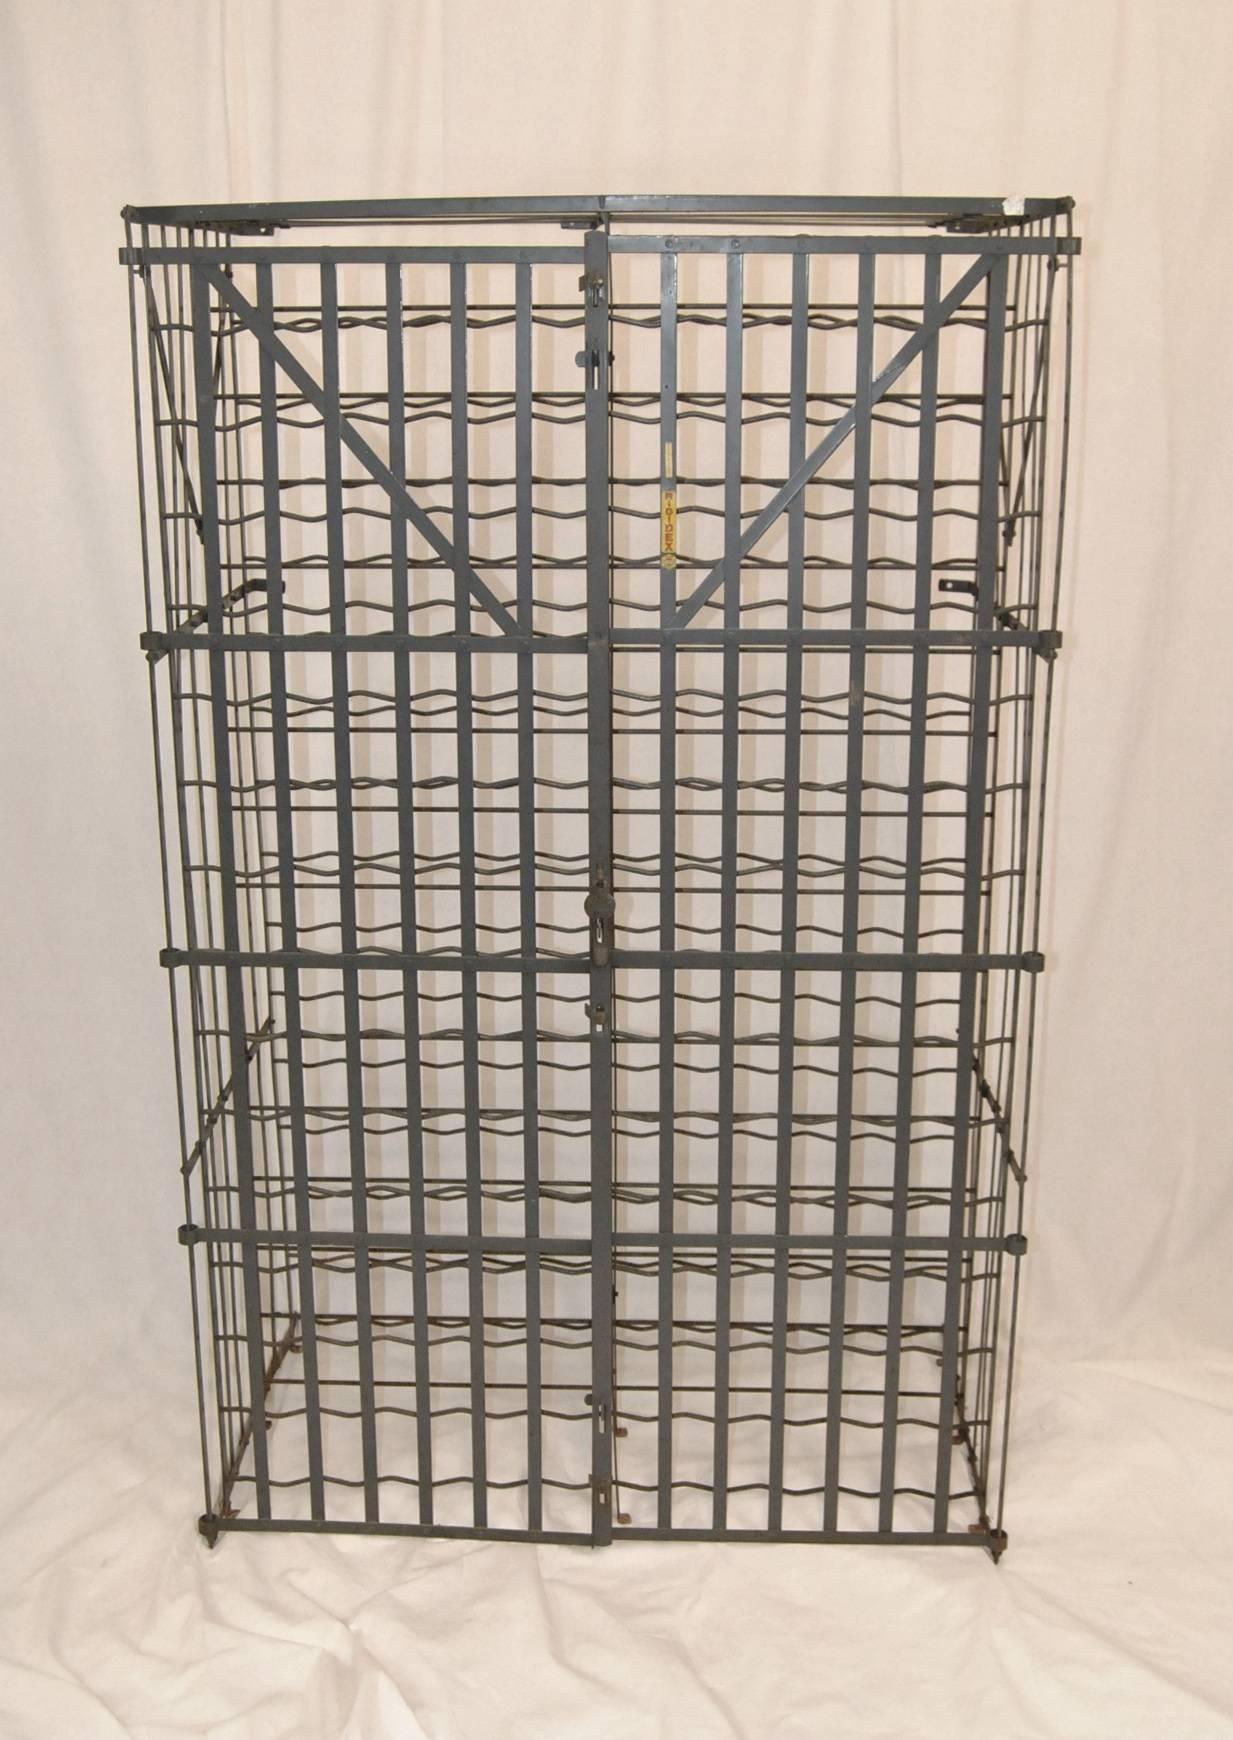 A commercial grade French strapped metal wine cage by Rigidex.  The wine cage can hold up to 300 bottles of wine in double rows.  Double doors have a locking hasp marked Rigidex (no Lock).  Yellow Rigidex tag adorns the front as does a tag stating